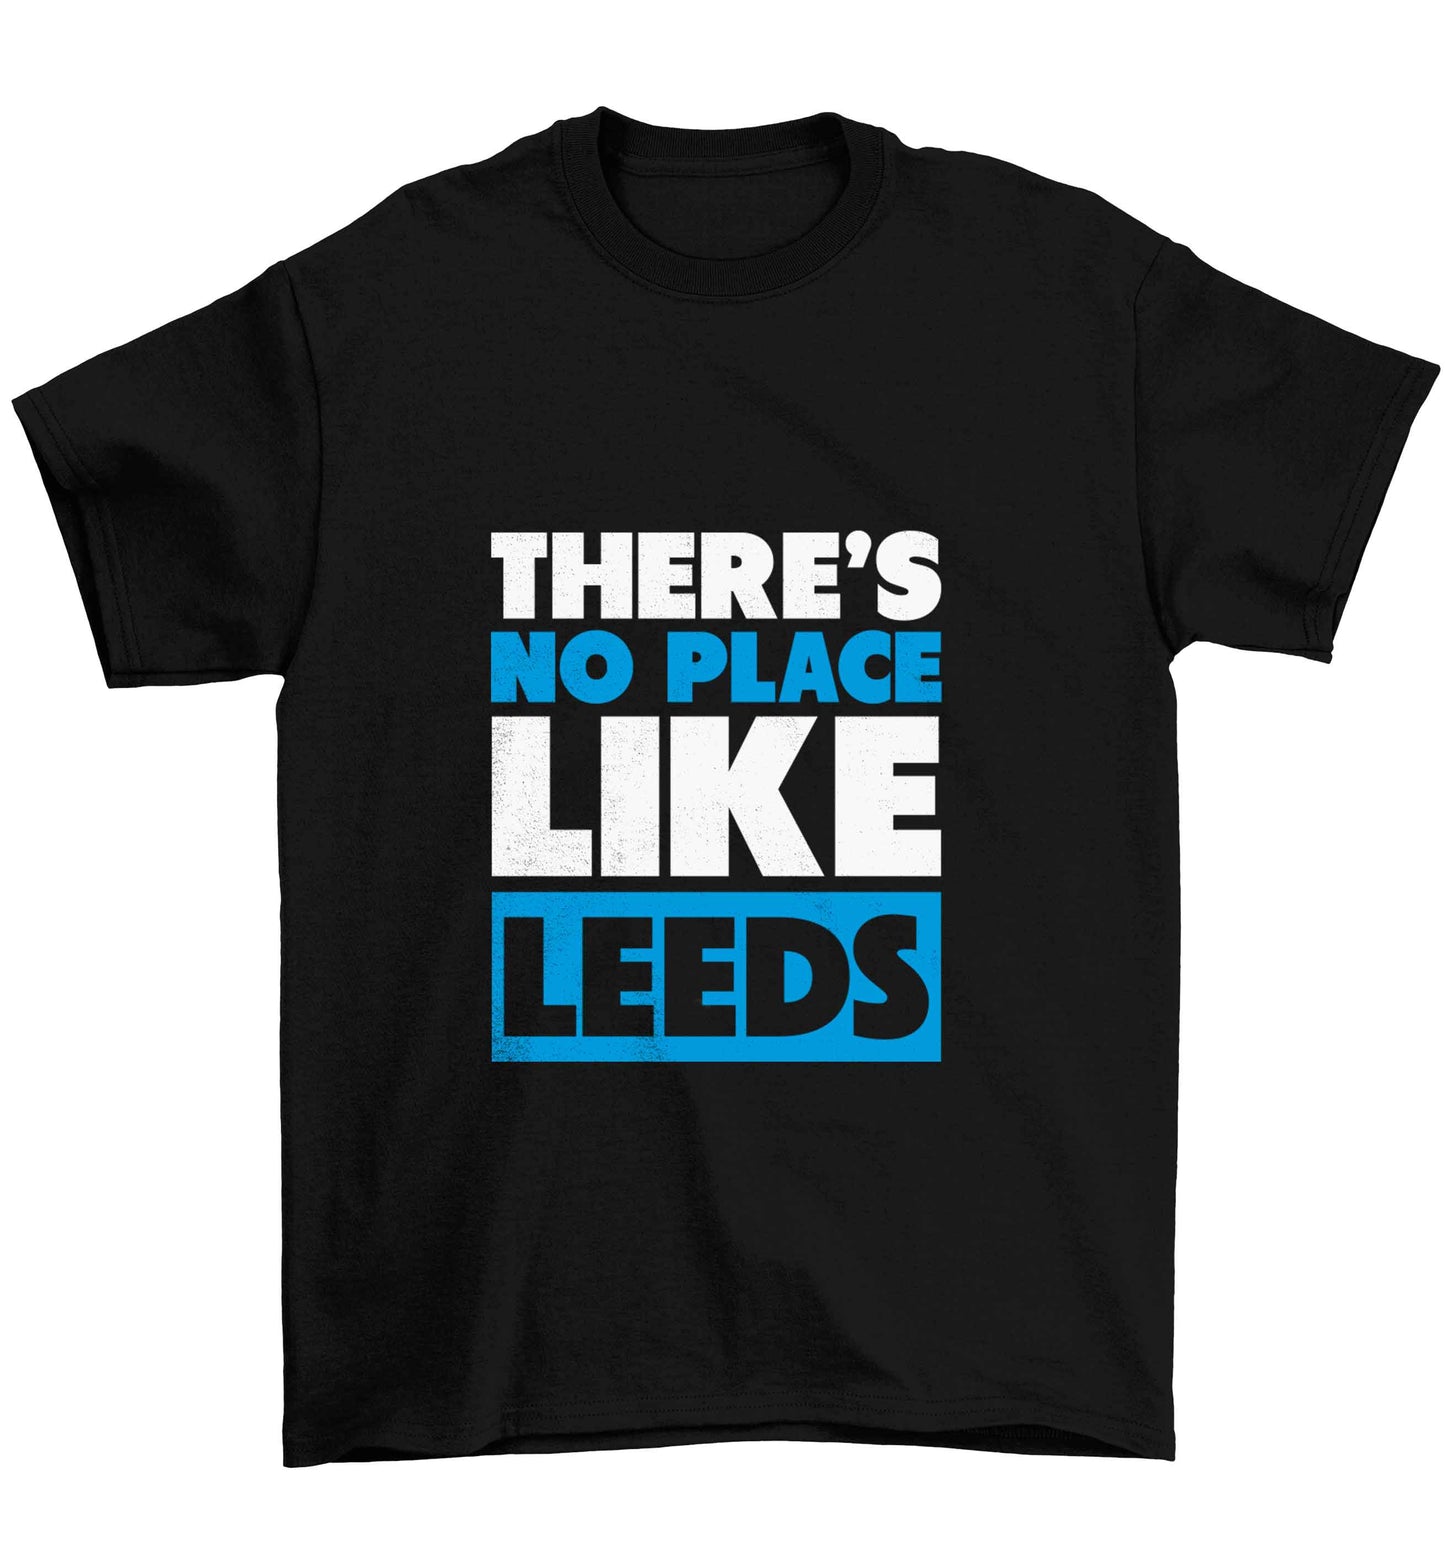 There's no place like Leeds Children's black Tshirt 12-13 Years